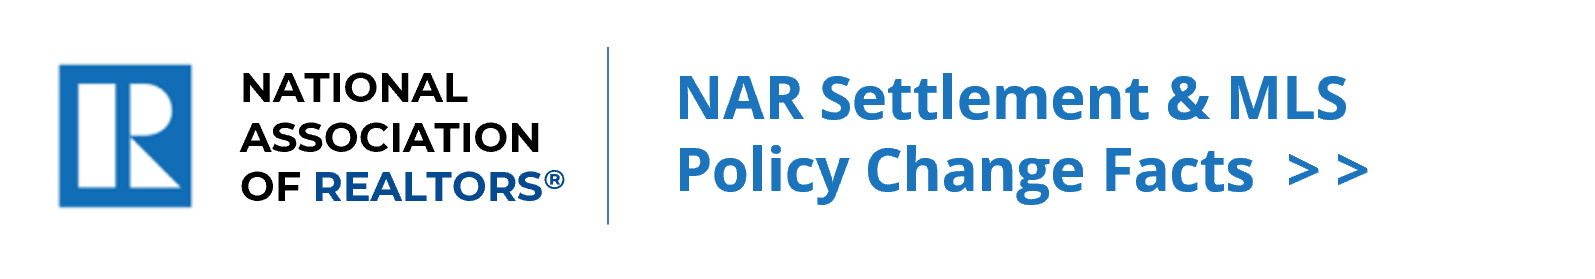 NAR Policy Ad Link